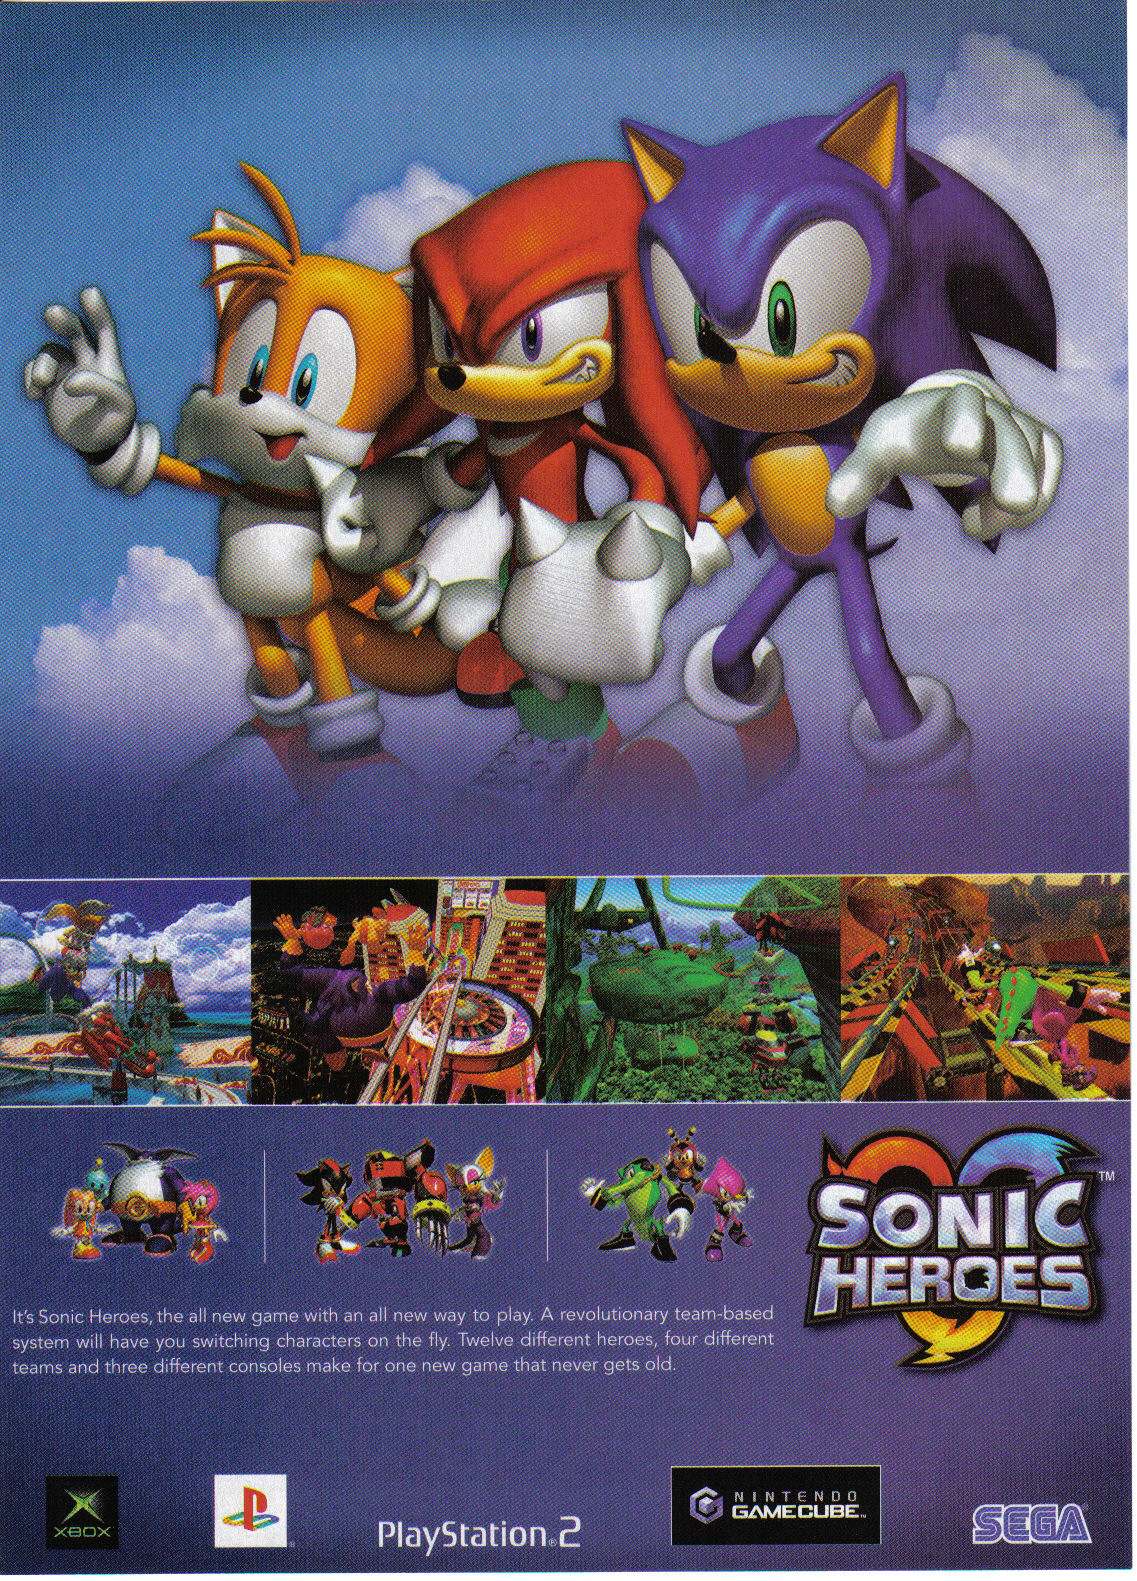 Sonic 2 Heroes Android - Colaboratory